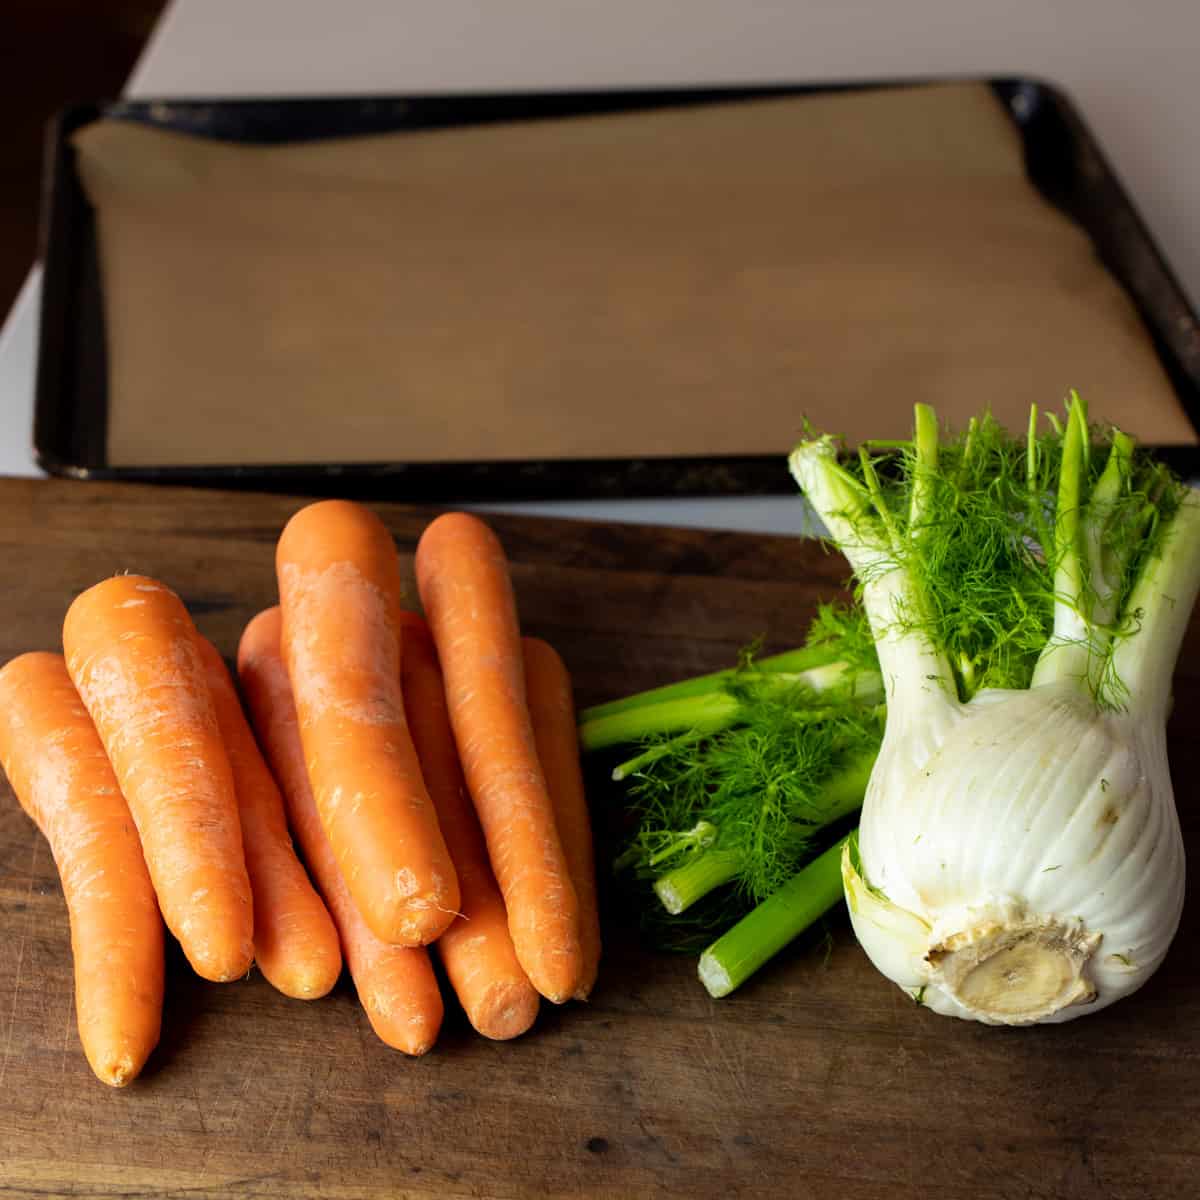 A pile of carrots and fennel on a cutting board.